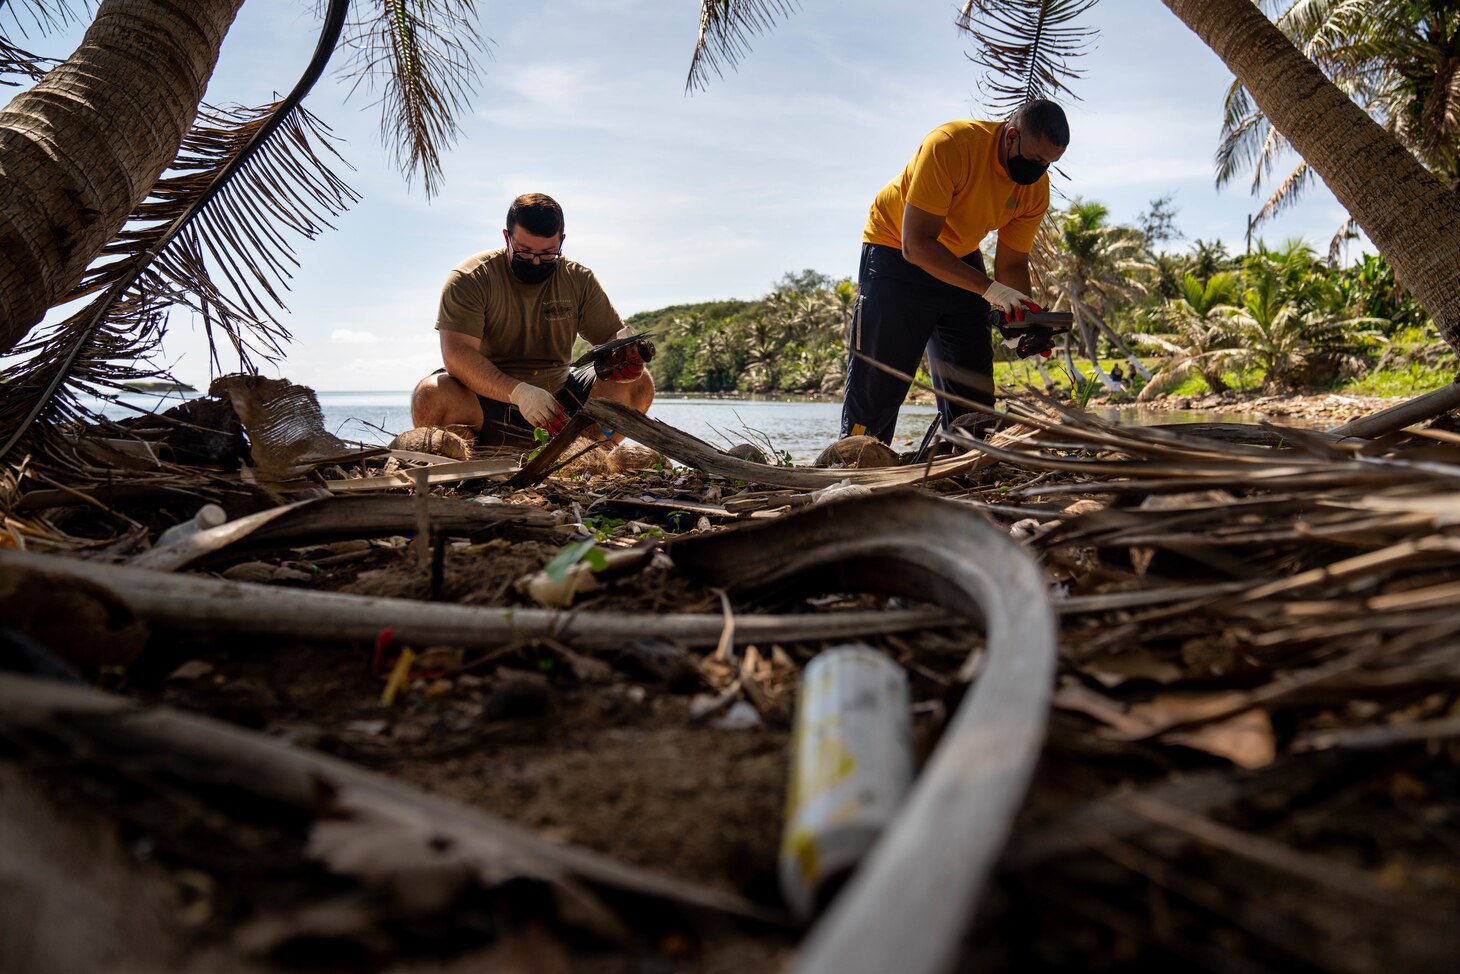 INALÅHAN, Guam (April 23, 2021) Lt. Cmdr. Andrew Regalado (right), from New York City, and Fire Control Technician 2nd Class Patrick Trevino, from Versailles, Kentucky, both assigned to Commander, Submarine Squadron 15, collect trash off the beach. CSS-15 and Naval Submarine Training Center Pacific, Detachment Guam, joined forces with their sister village, Inalåhan, during a volunteer event focused on environmental cleanliness to recognize Earth Day.